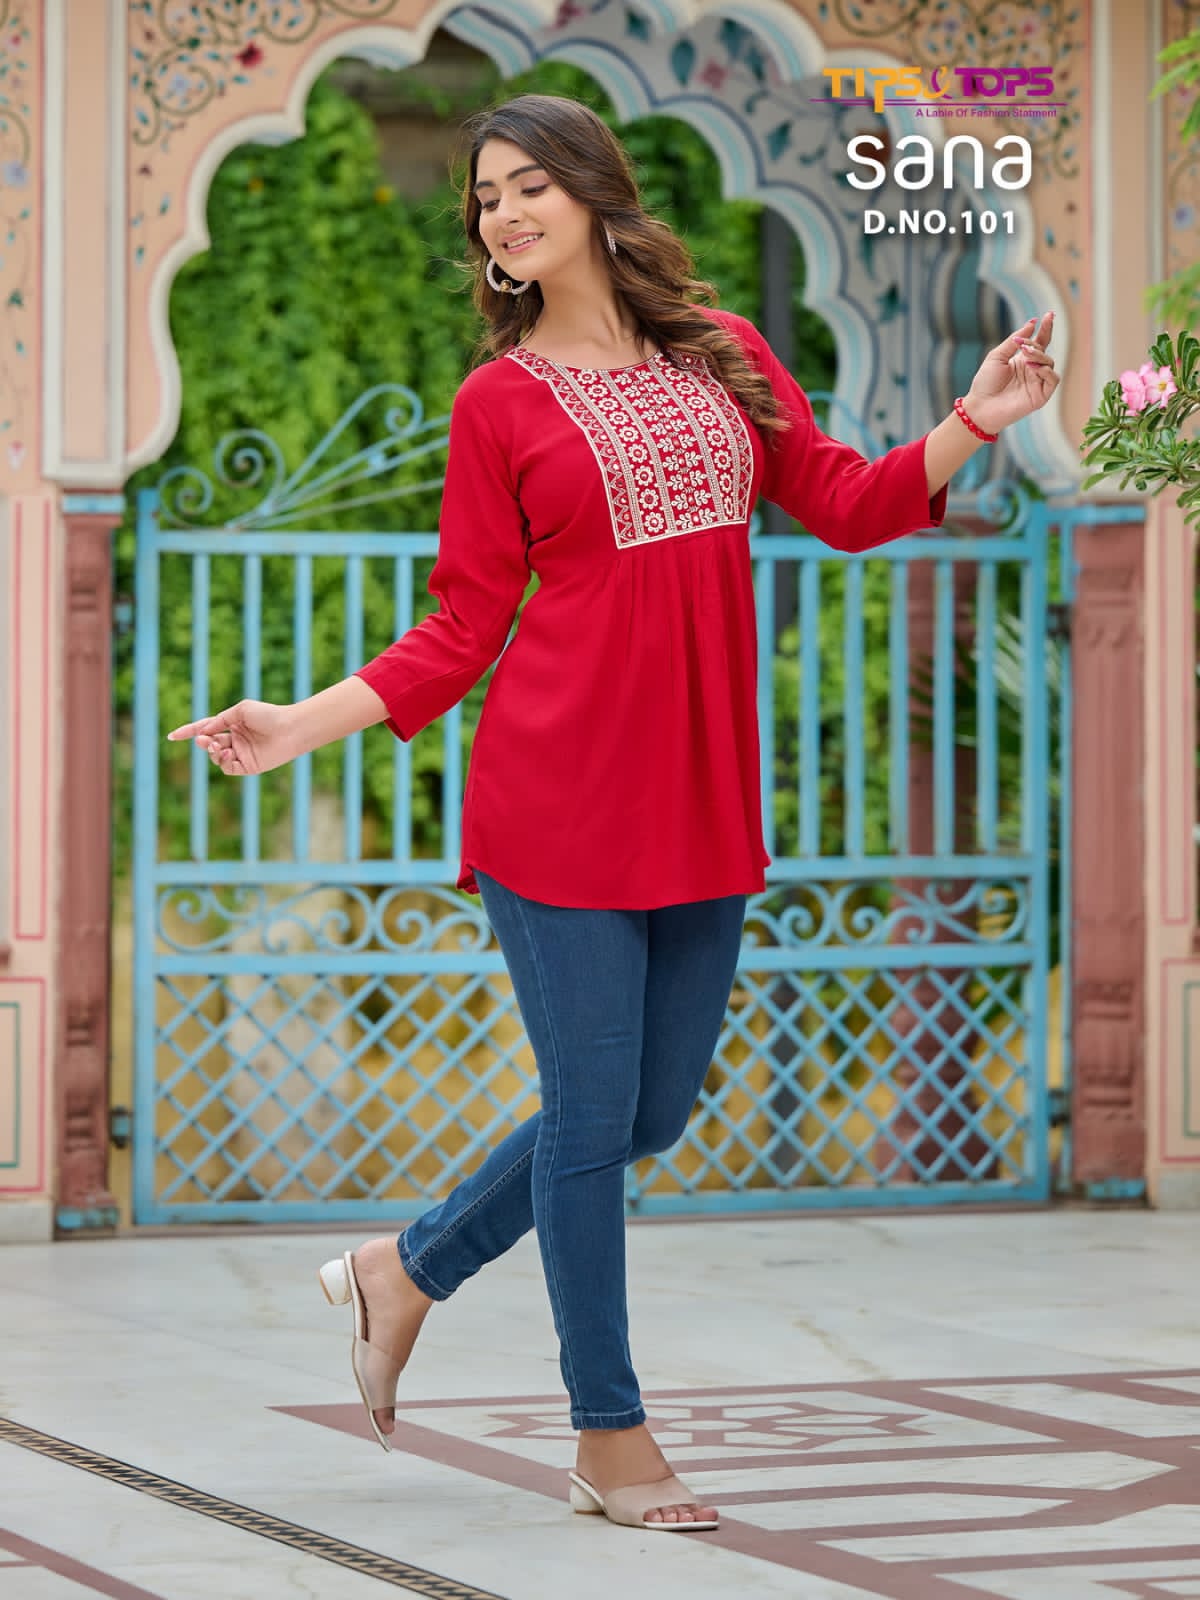 Tips Tops Sana Ladies Tops Catalog collection 5